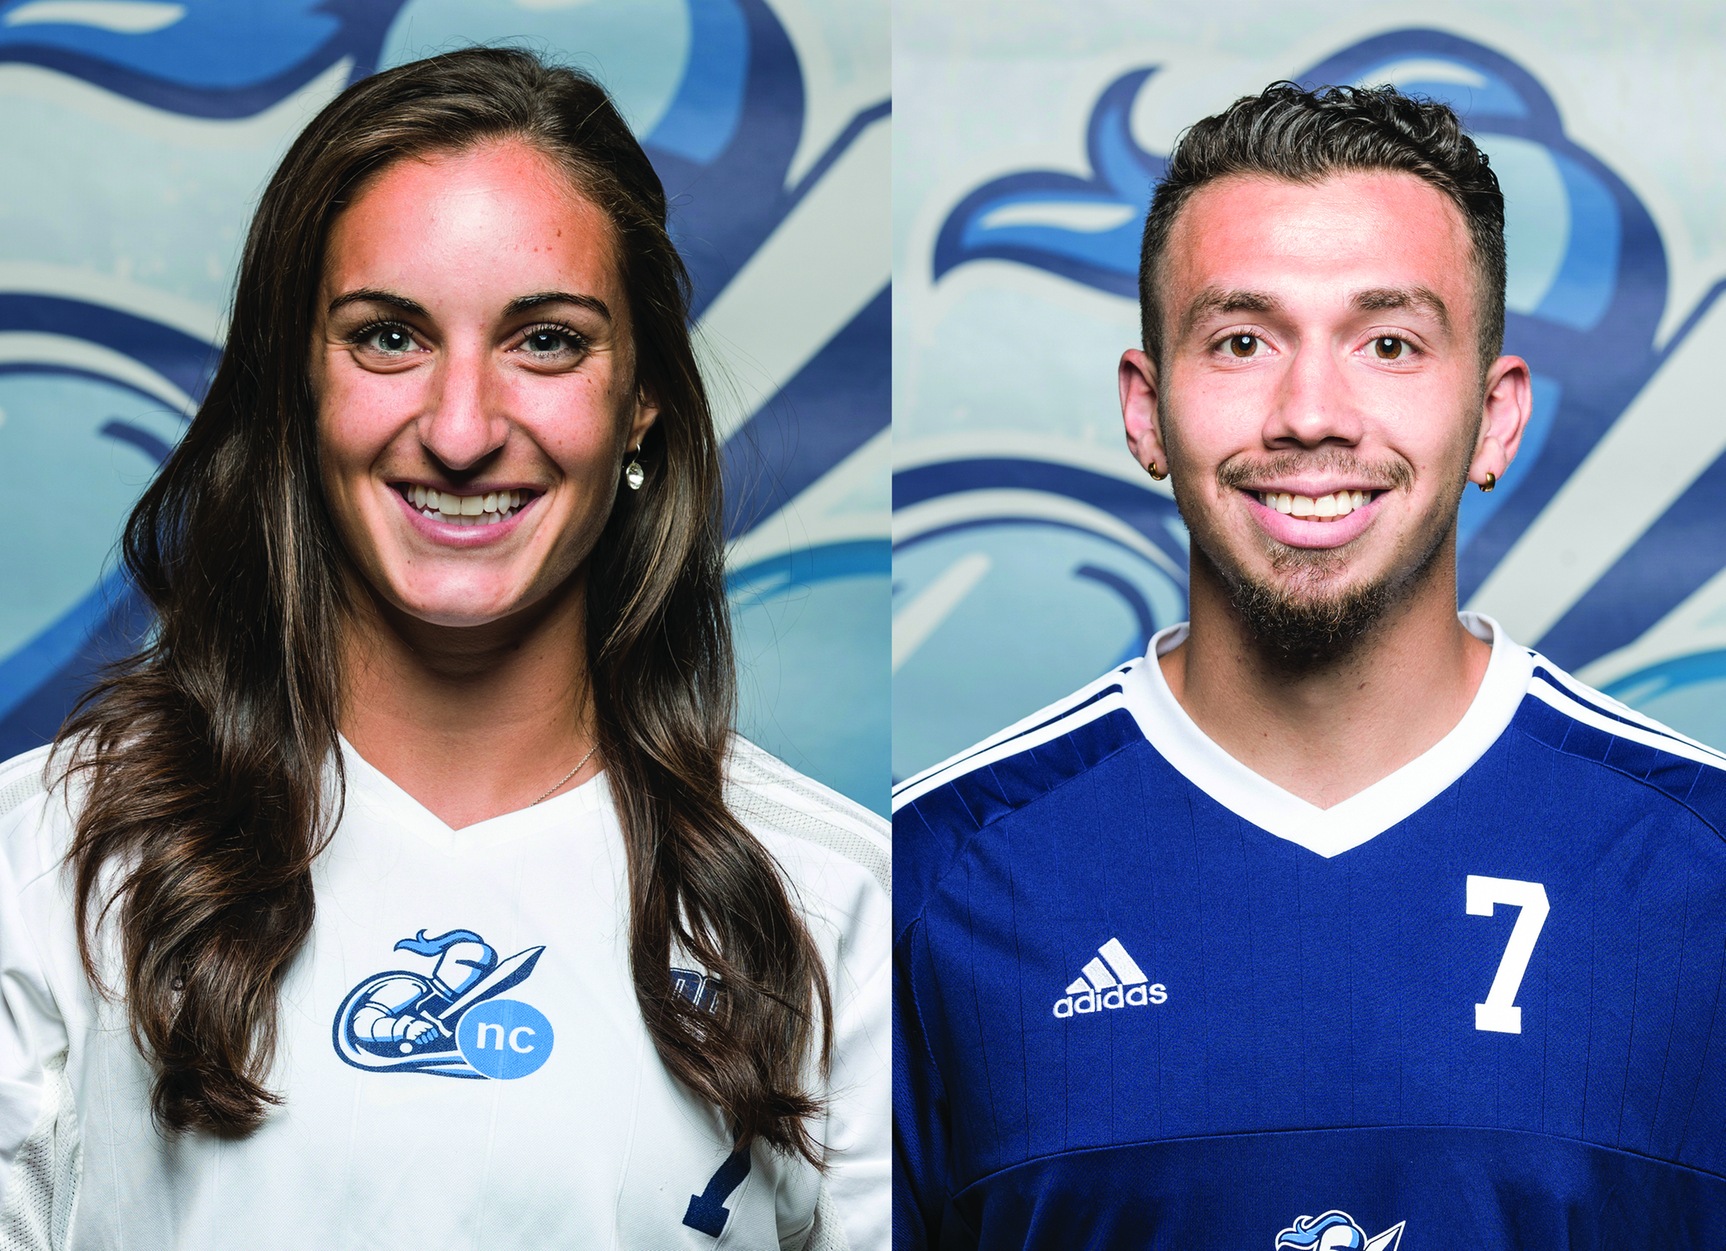 NEWS: Amores and Bruzzese named athletes of the week